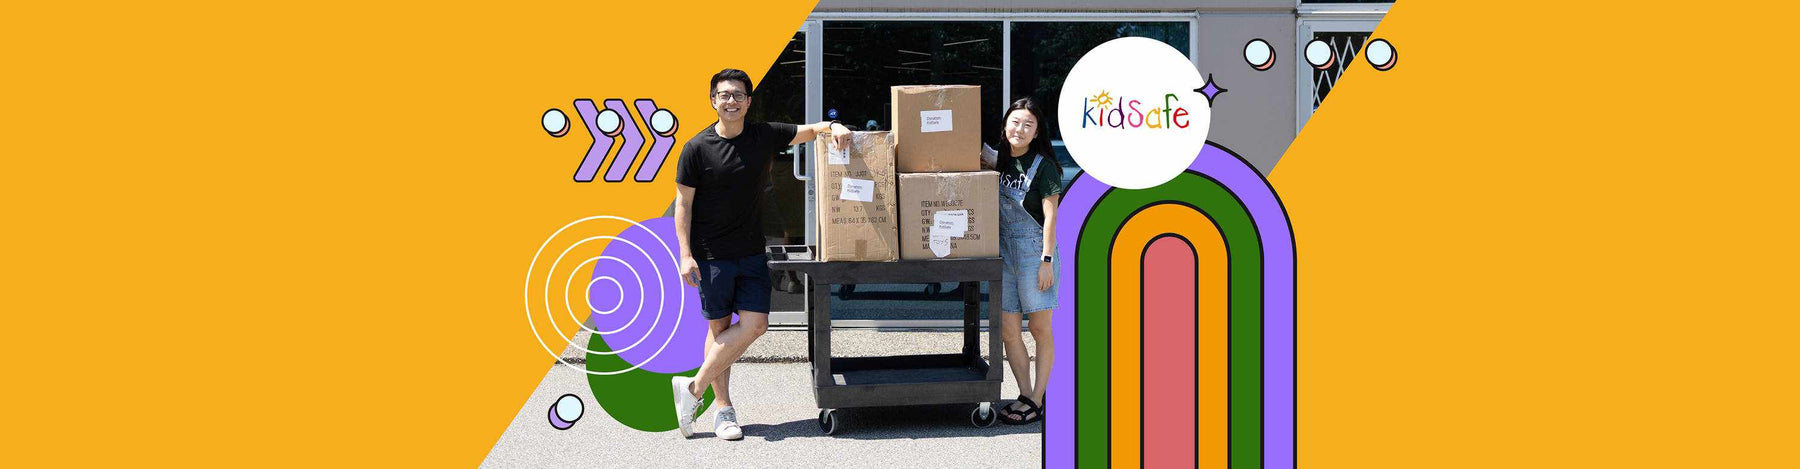 BBMC sends out over $6500 worth of donations for KidSafe Project Society